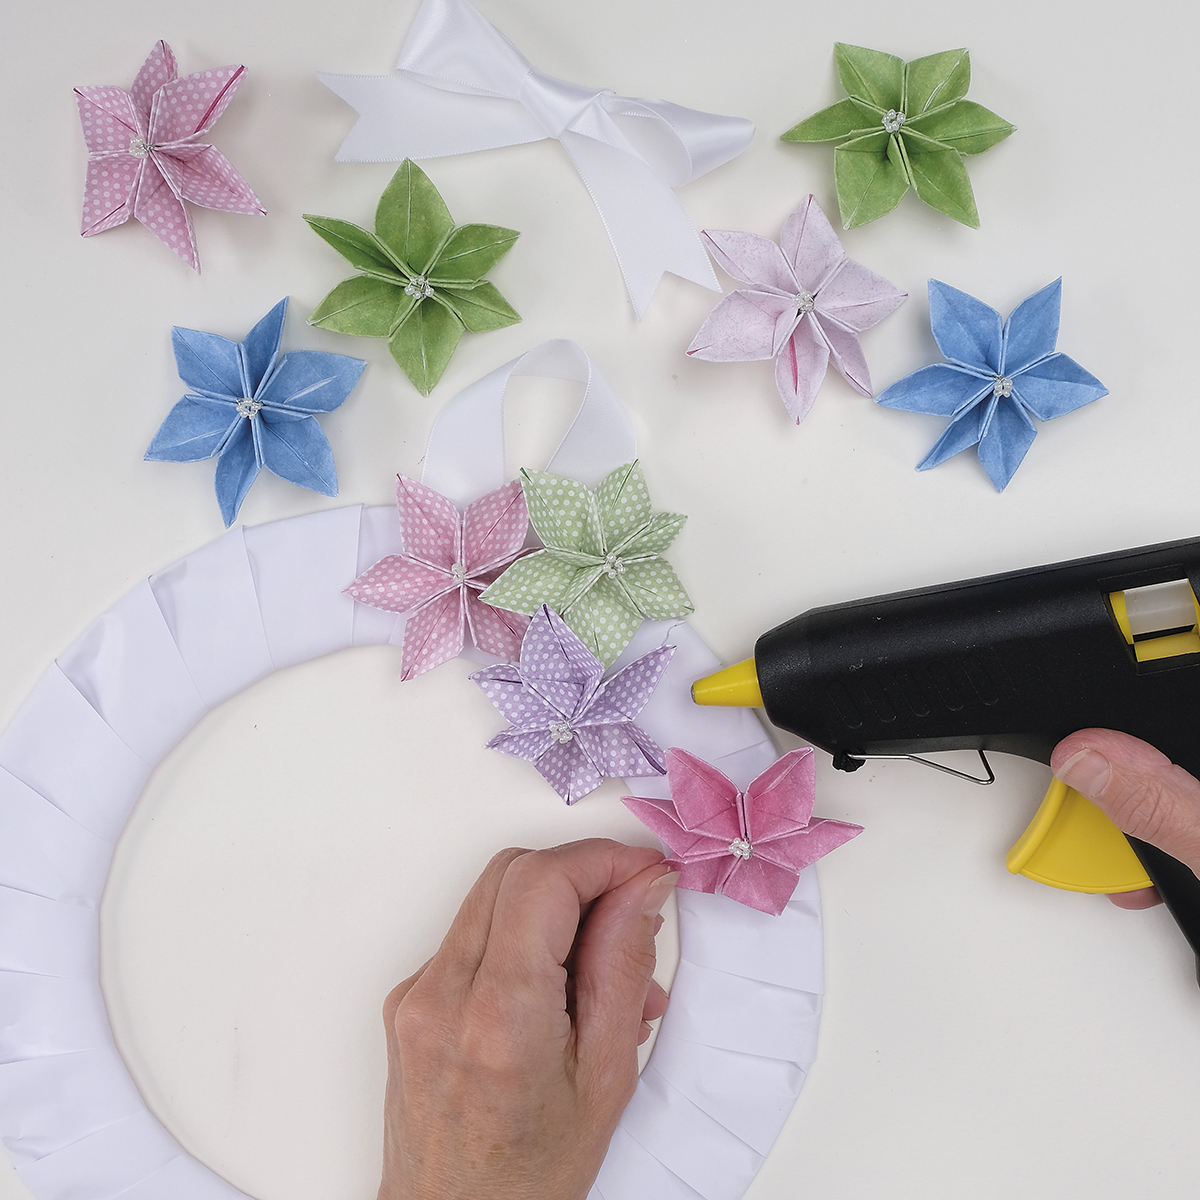 How to make an origami wreath - step 8